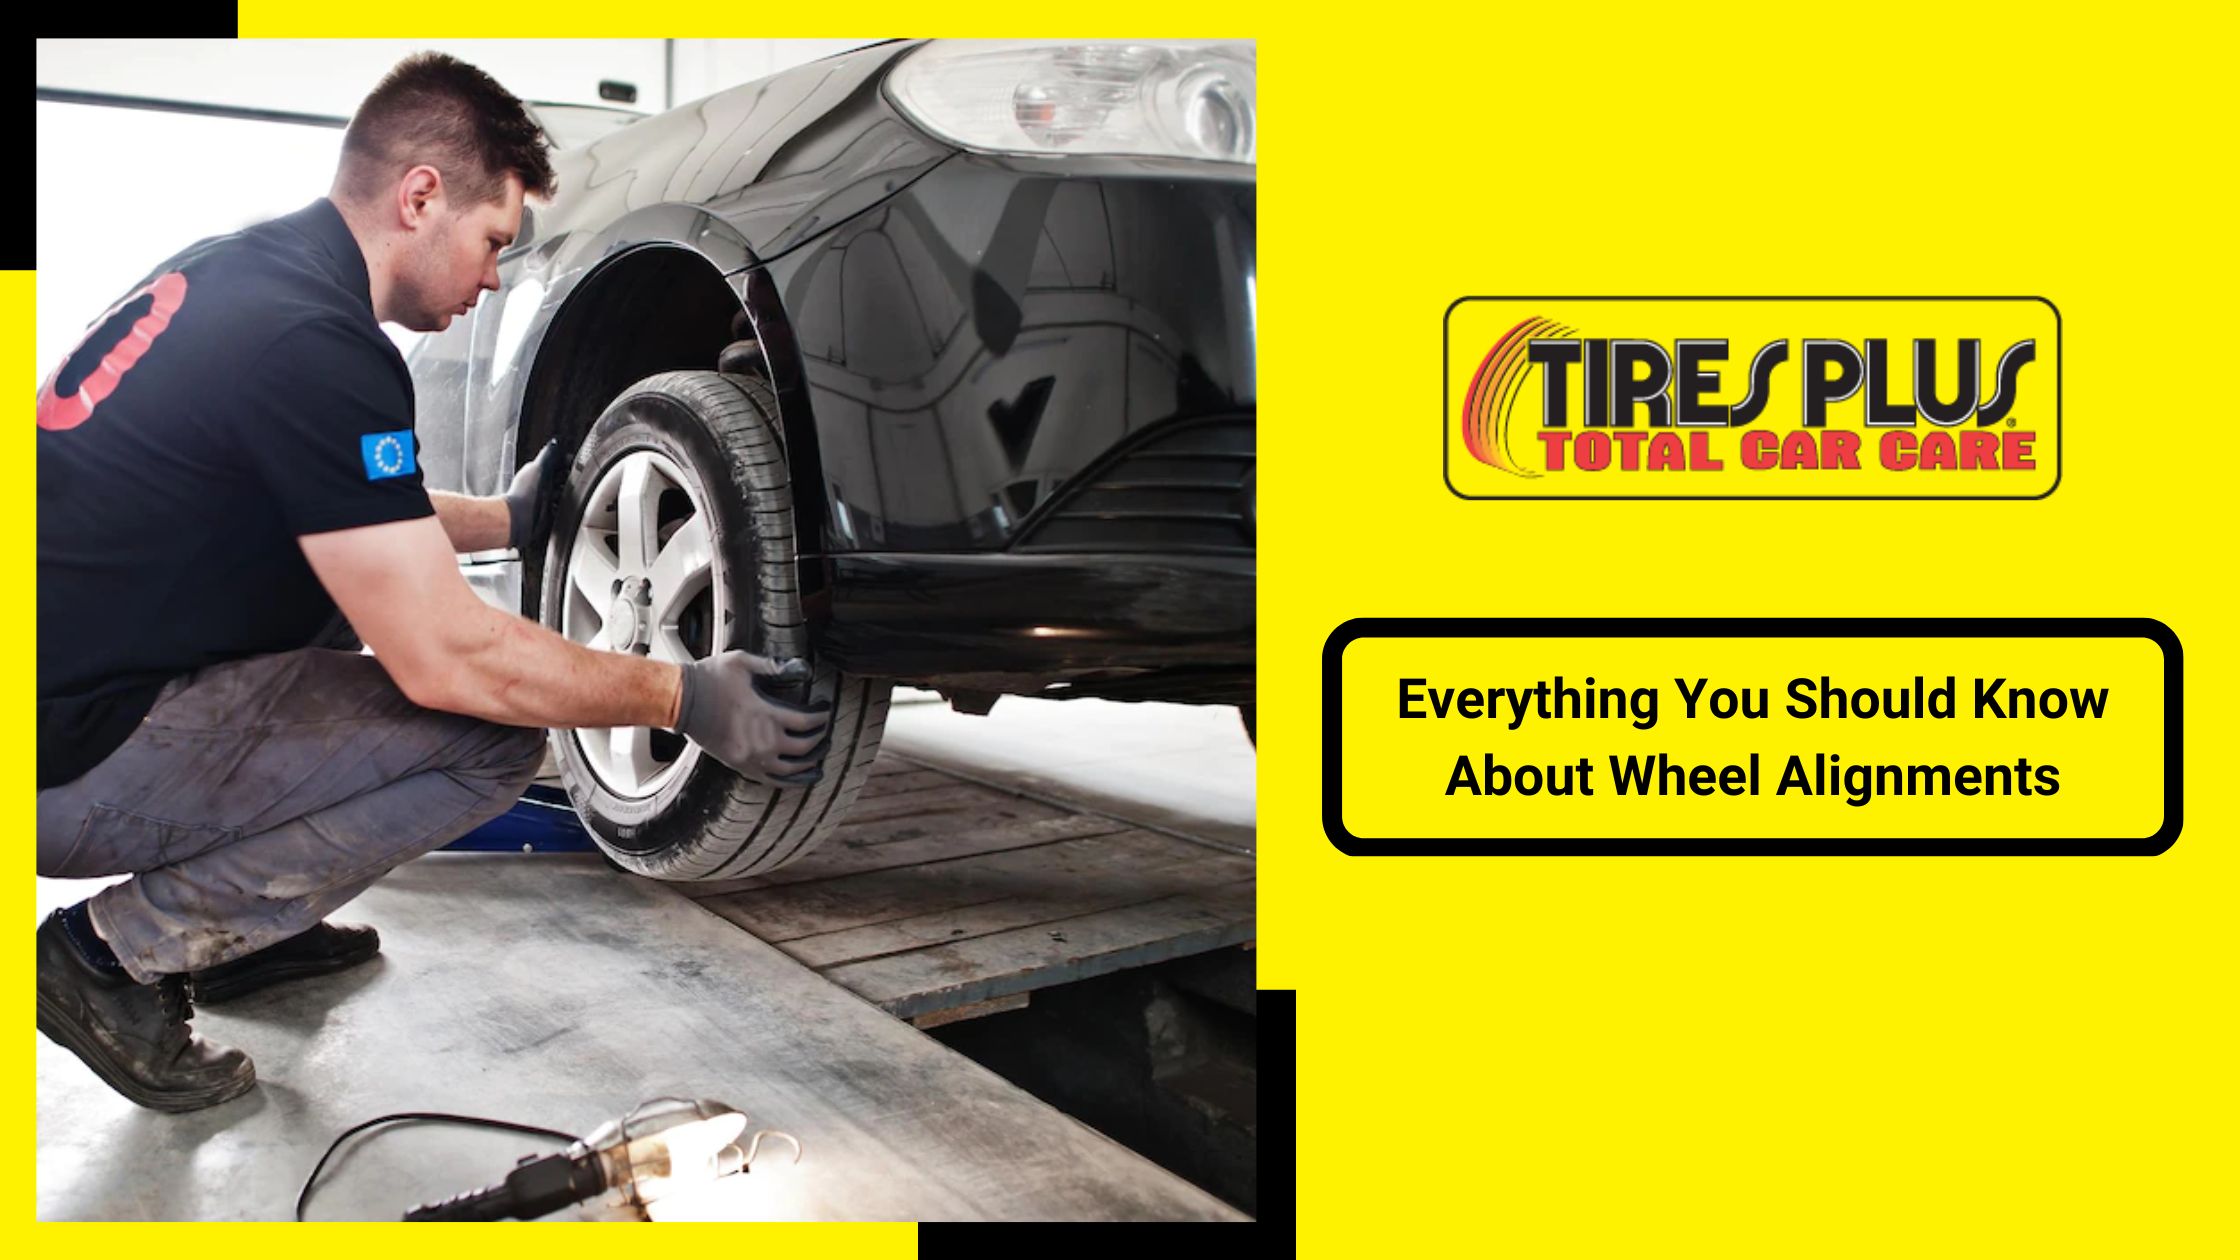 Everything you Should know about Wheel Alignments